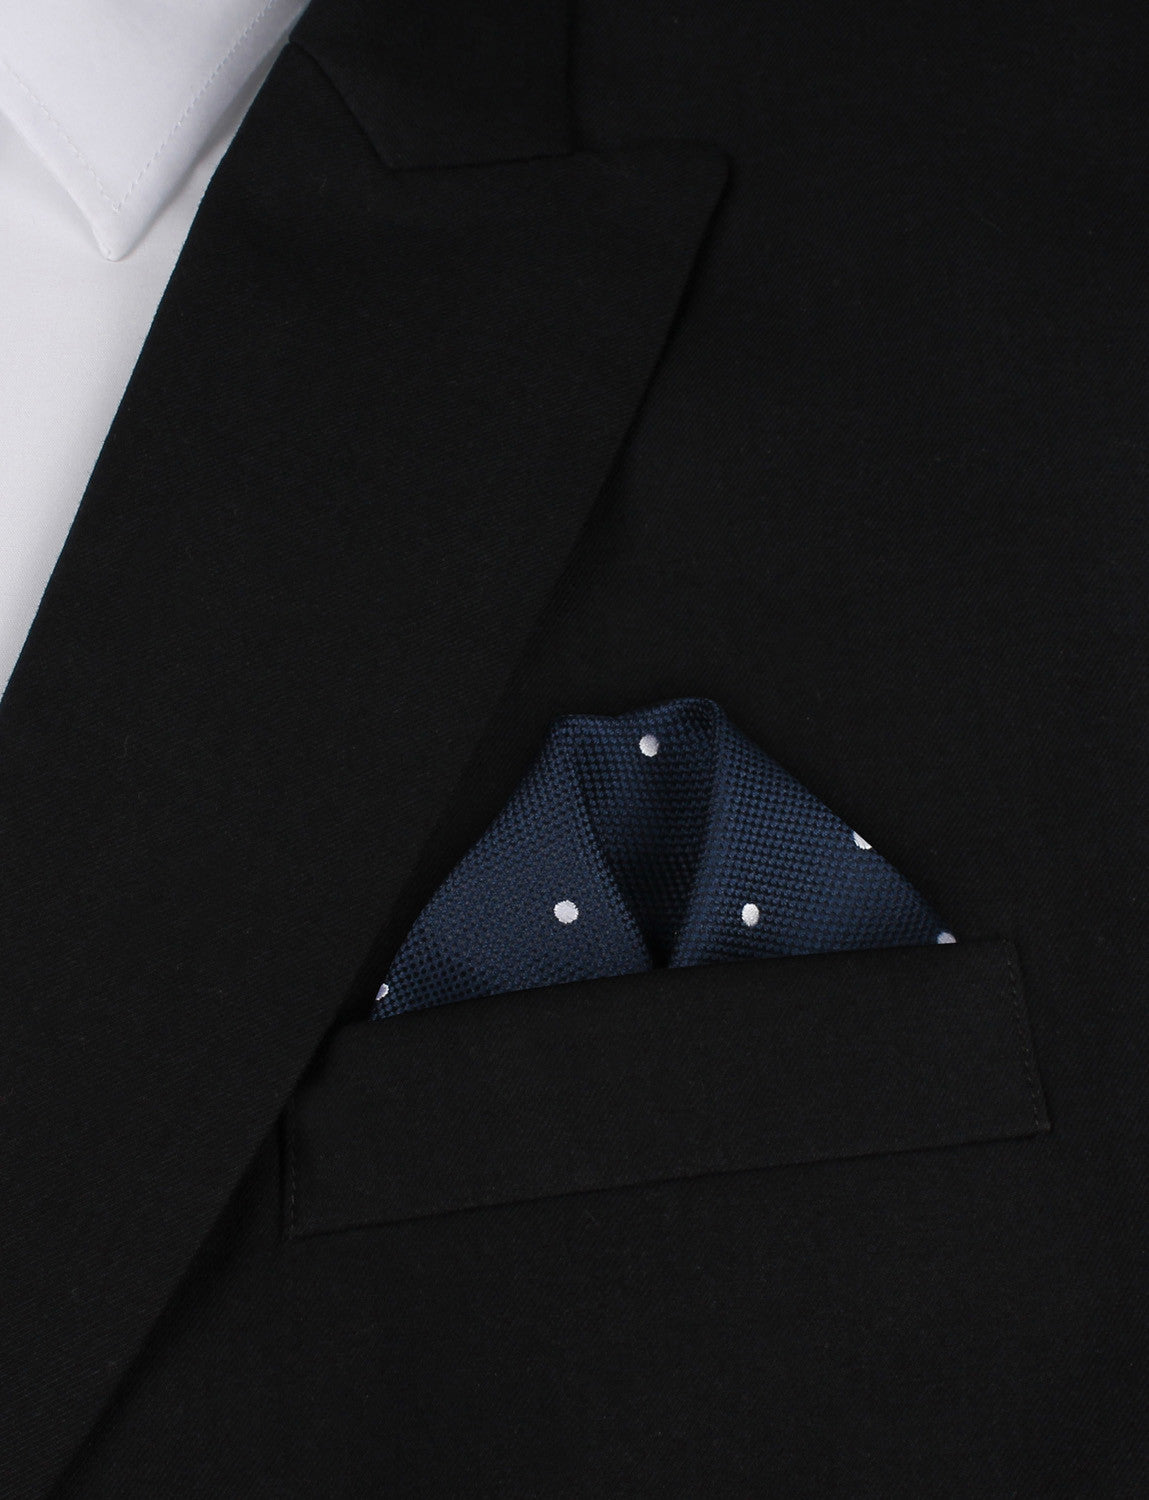 Navy Blue with White Polka Dots - Winged Puff Pocket Square Fold